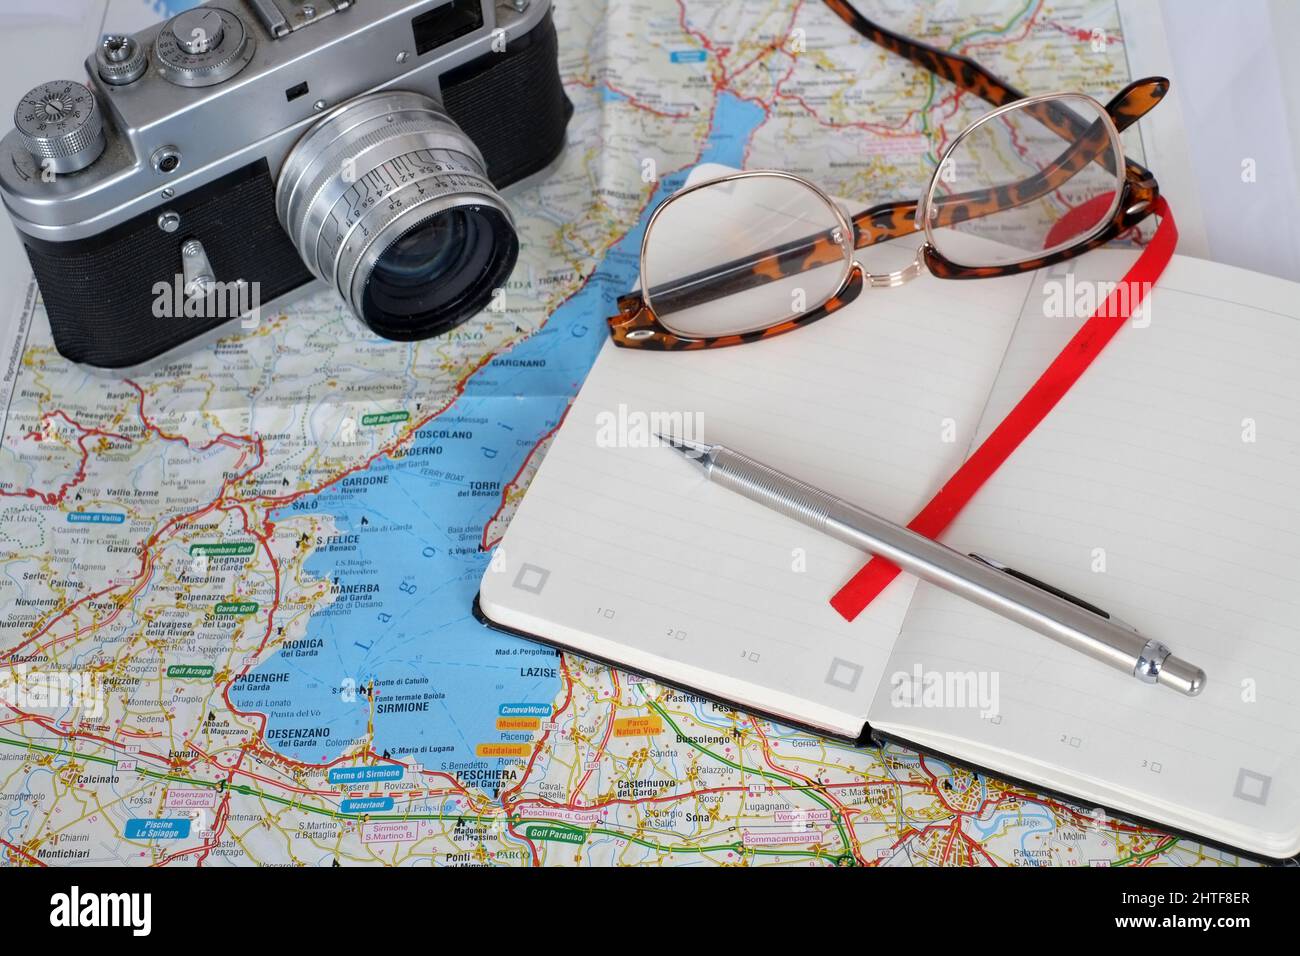 February 2022 - Travel planning - old film camera, with note book, glasses and a map of Lake Garda in Italy Stock Photo